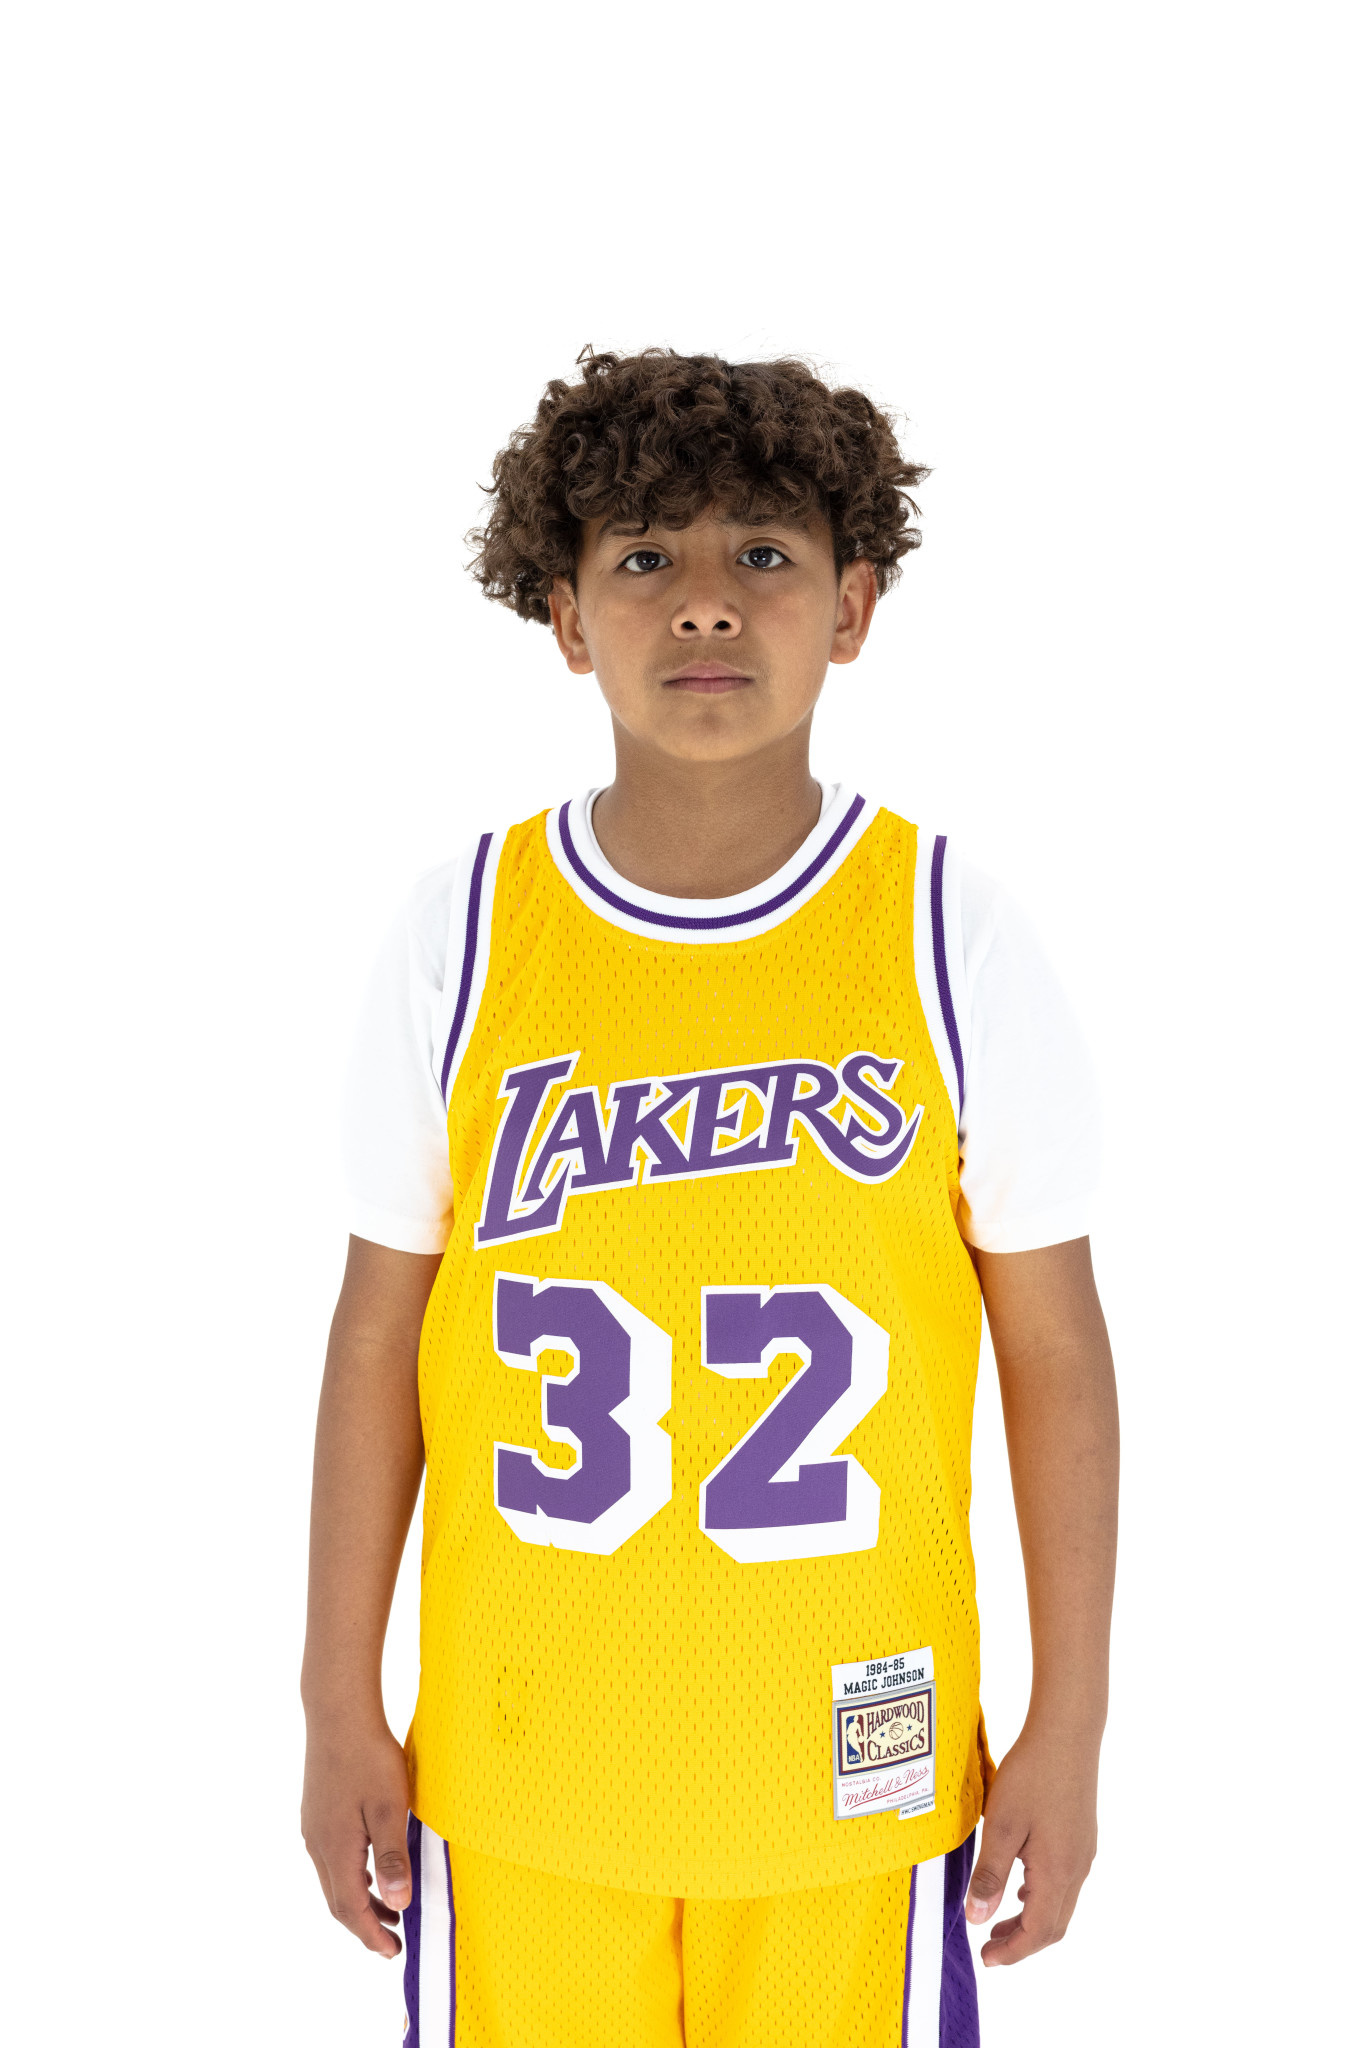 black lakers jersey youth